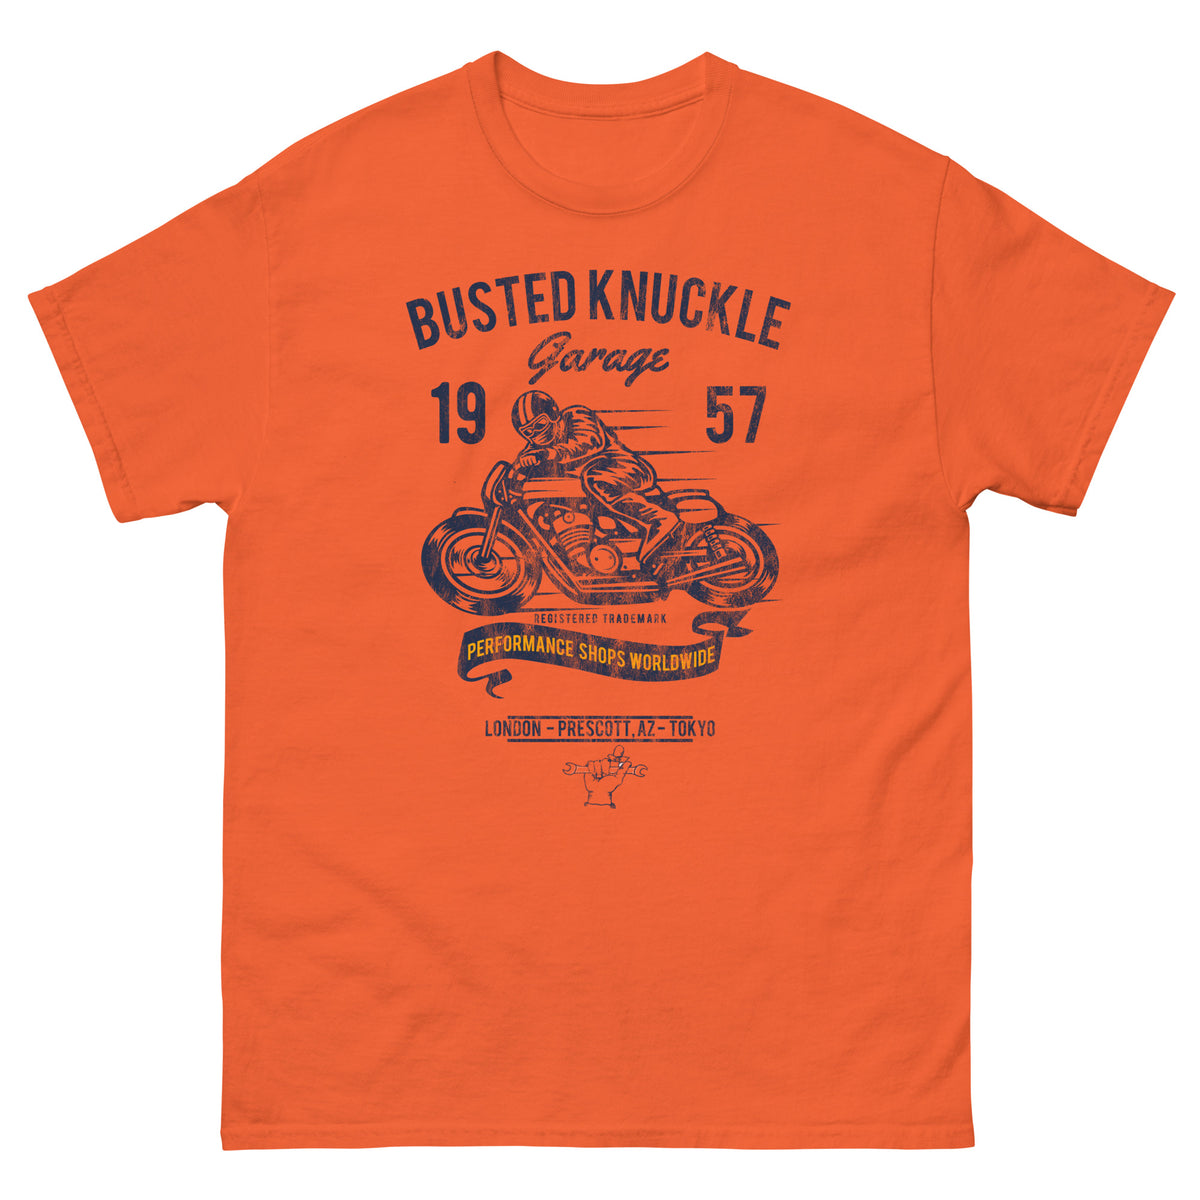 Busted Knuckle Garage Heavyweight Motorcycle Performance T-Shirt